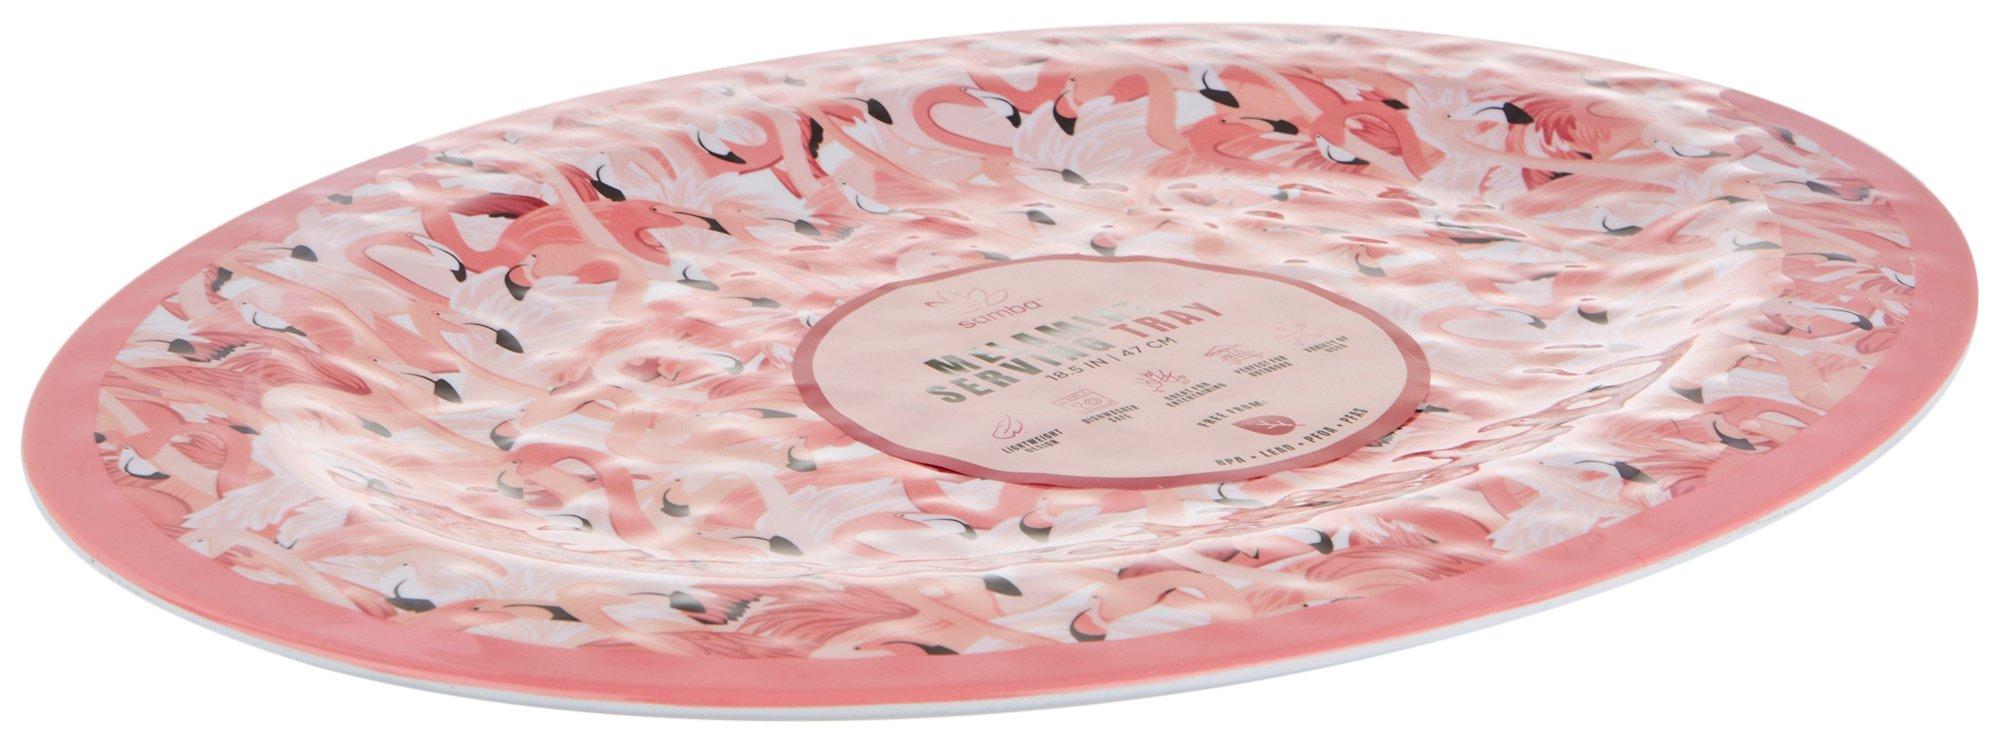 Oval Flamingo Serving Tray